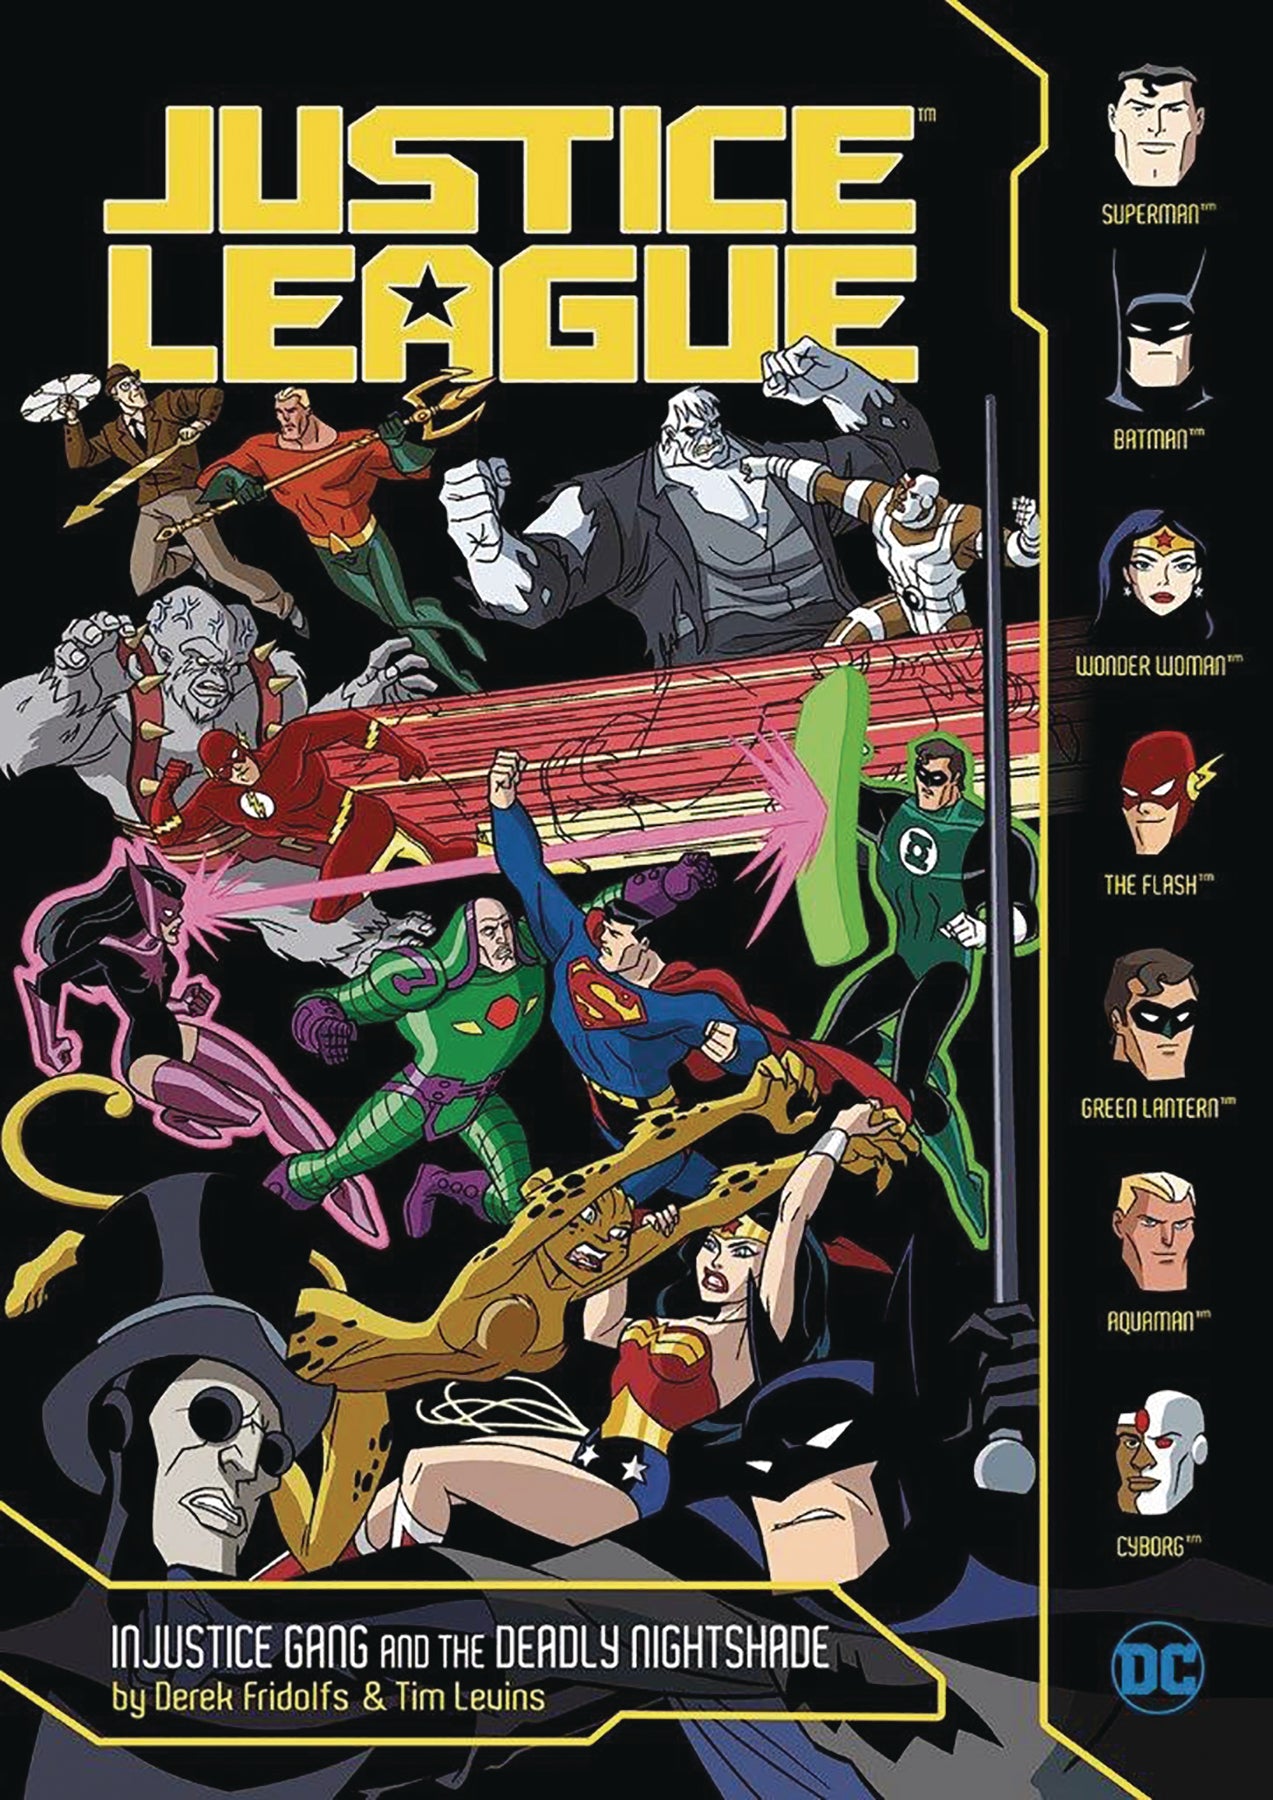 Justice League Young Reader Injustice Gang and the Deadly Nightshade